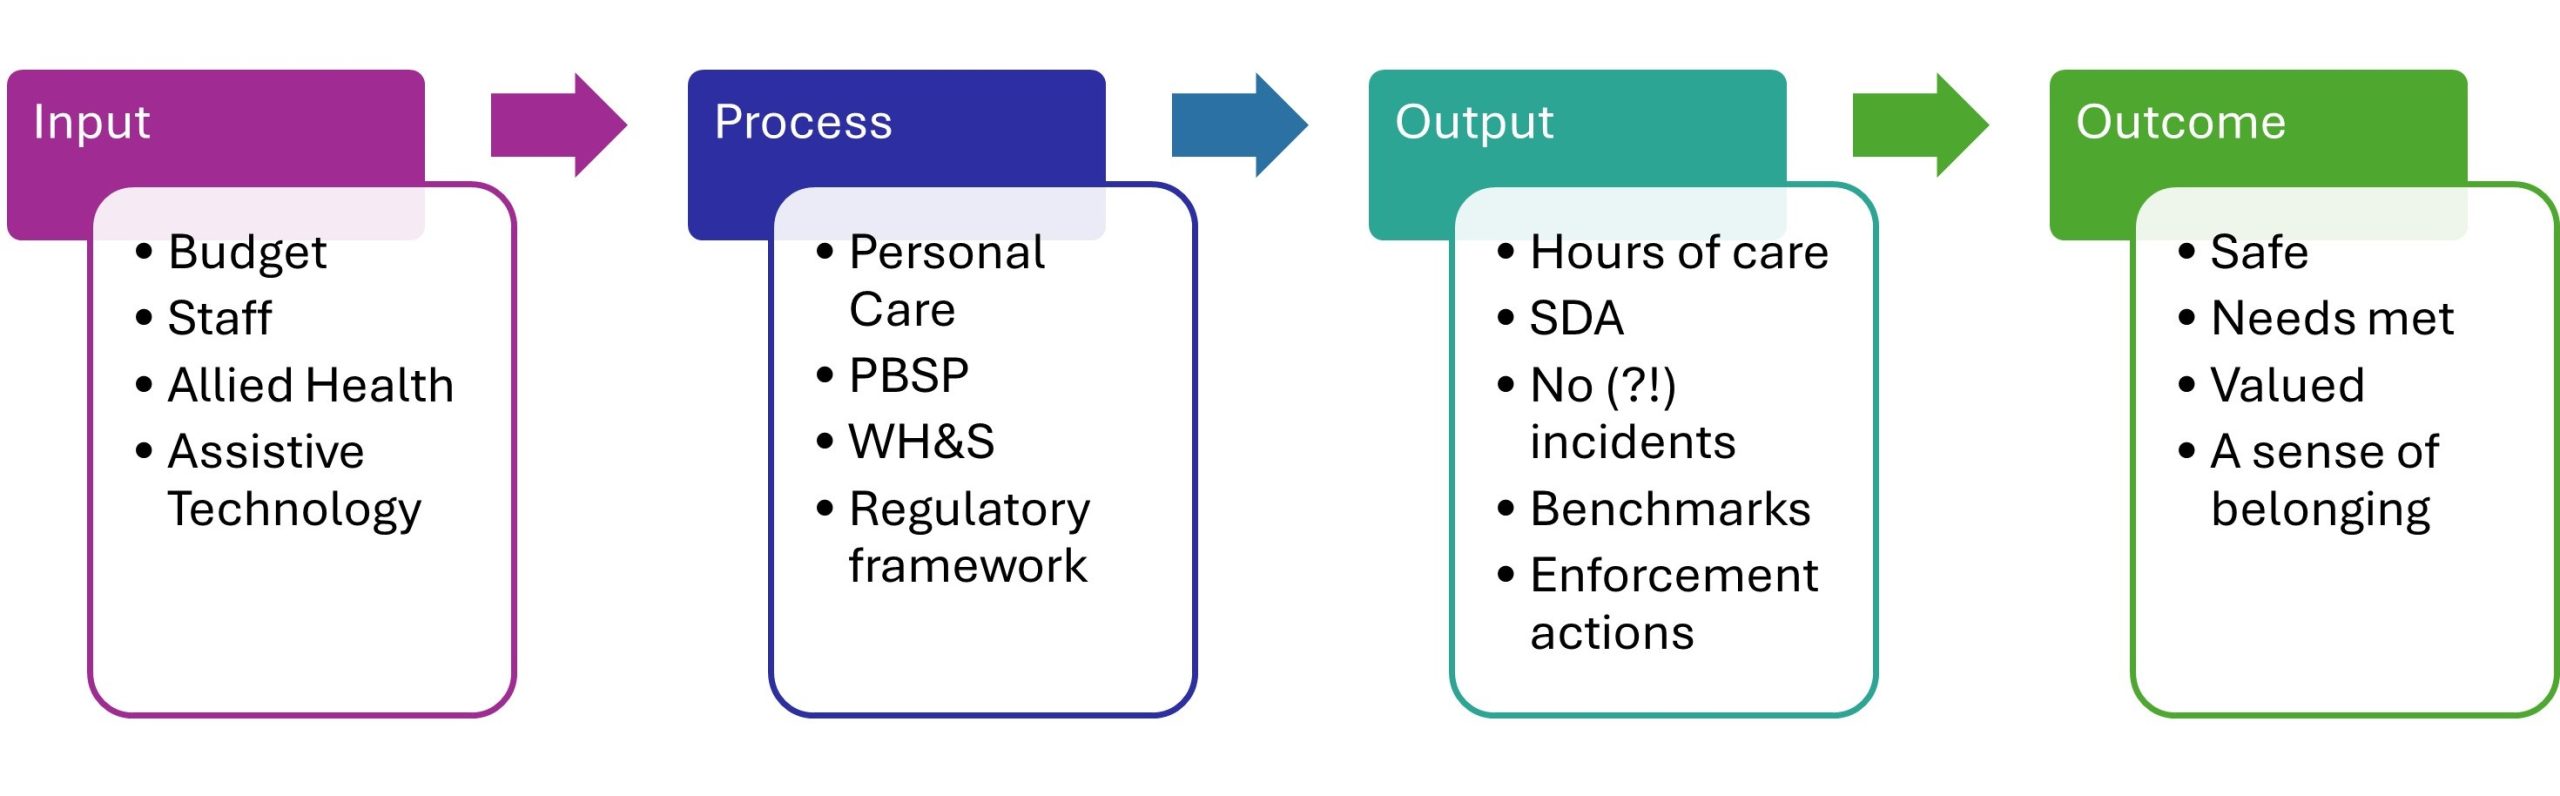 Extended diagram with detail , input process output outcome